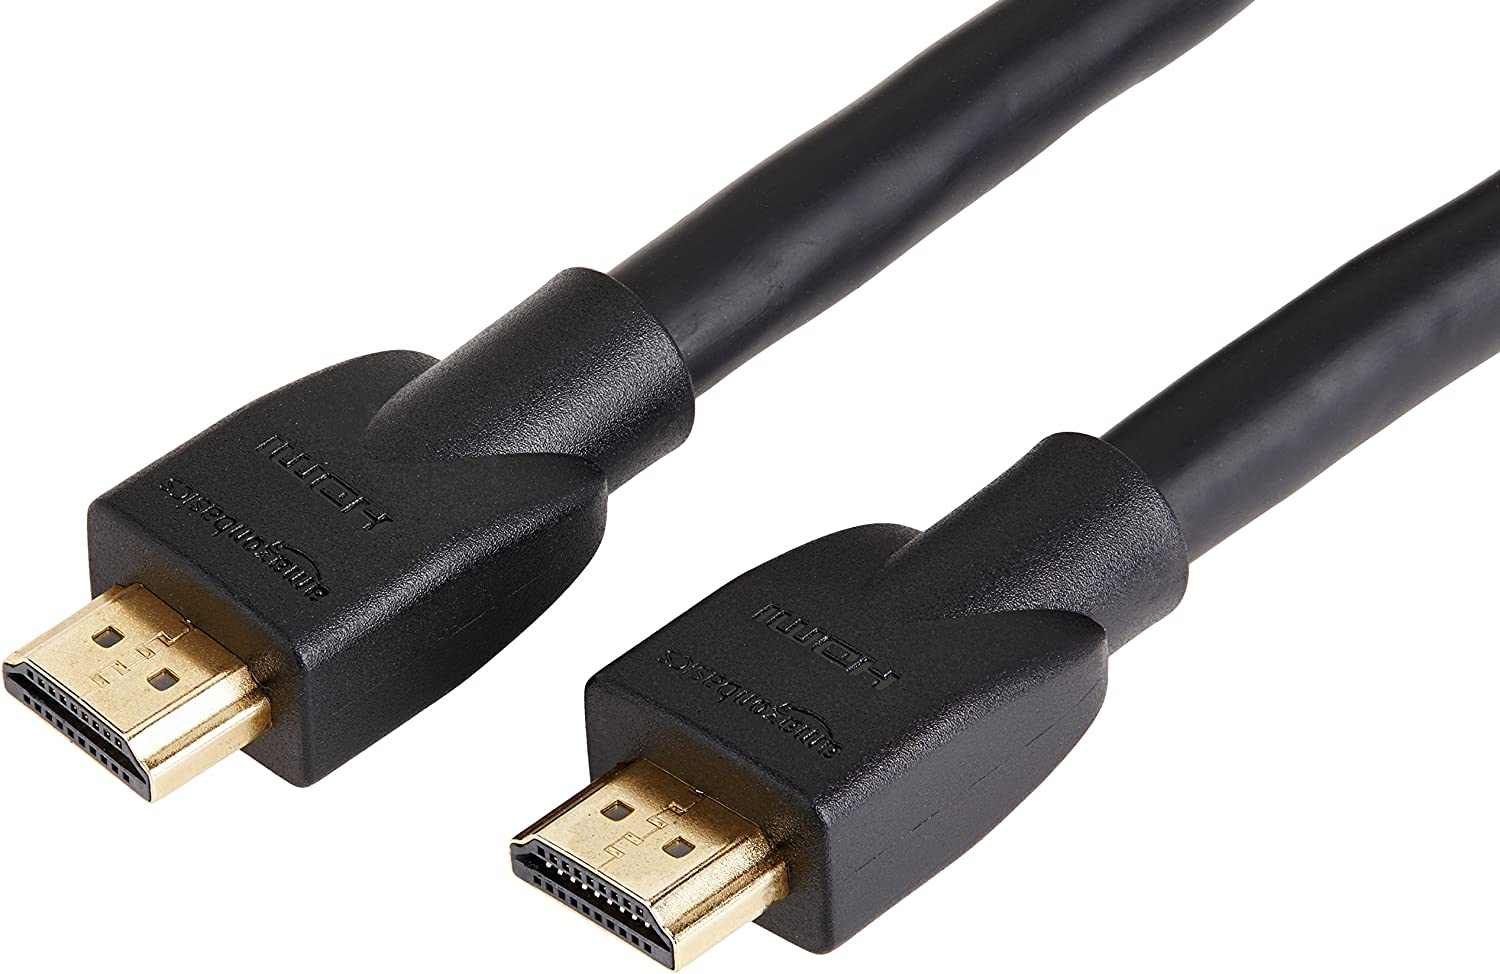  5. AmazonBasics CL3 Rated High Speed 4K HDMI Cable 